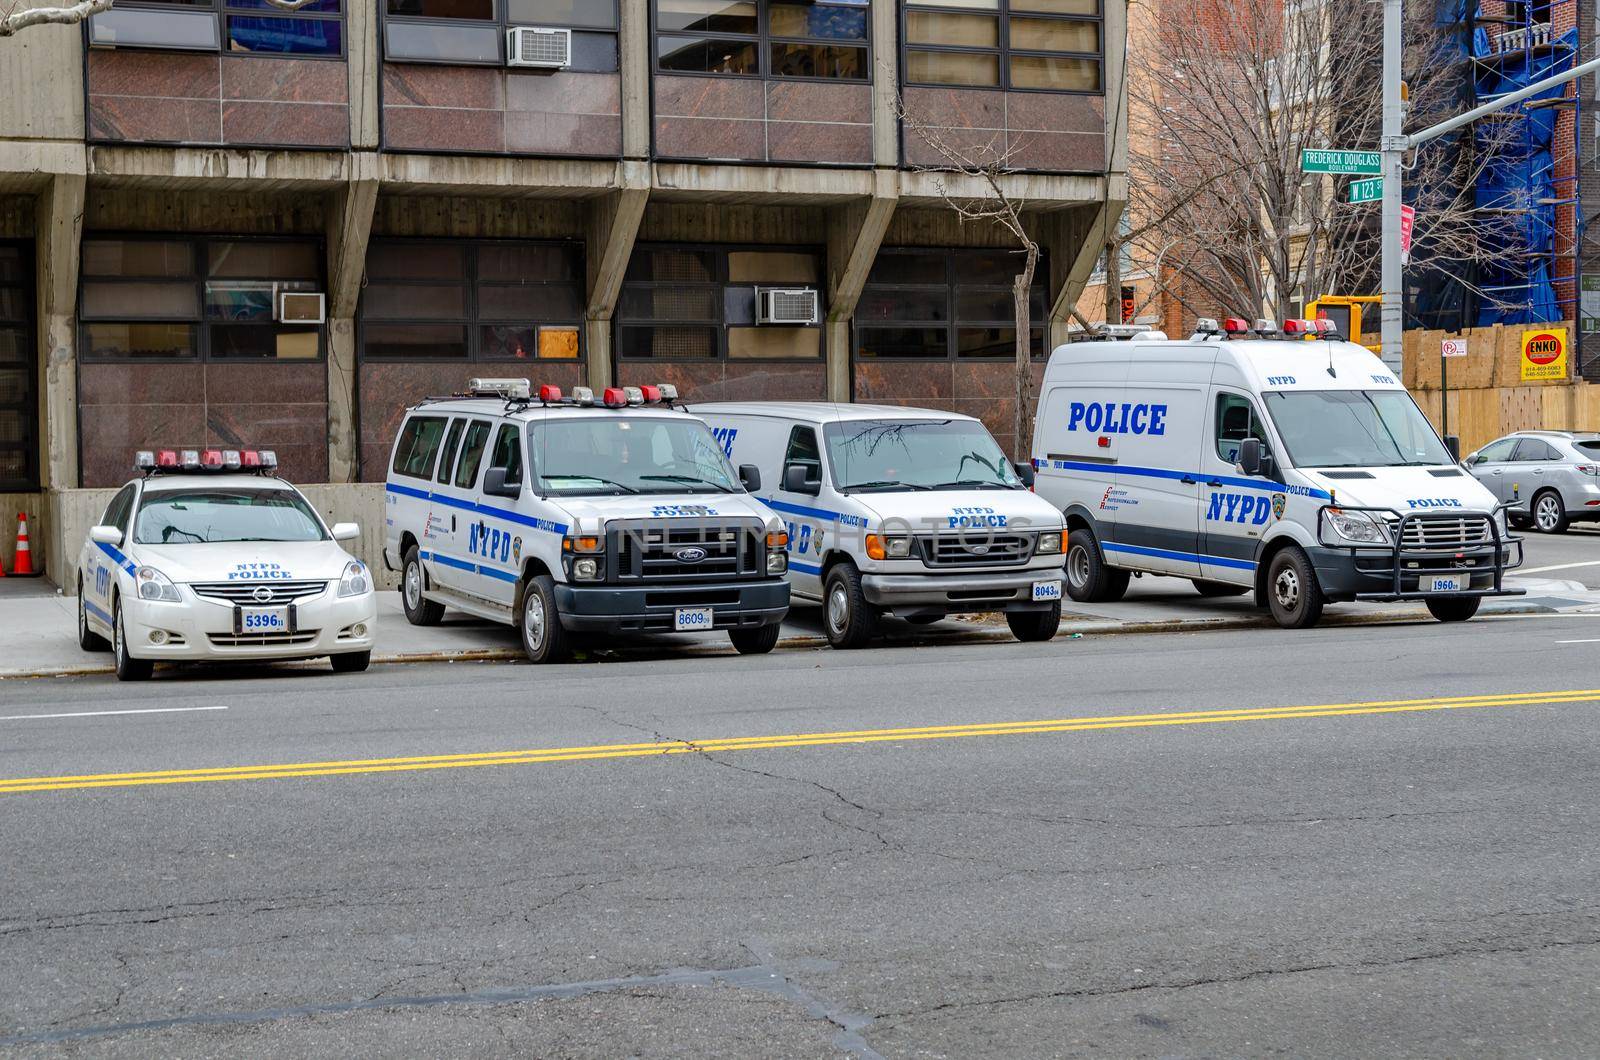 NYPD Different New York Police Department cars parked next to each other at a police station,  Harlem, New York City by bildgigant